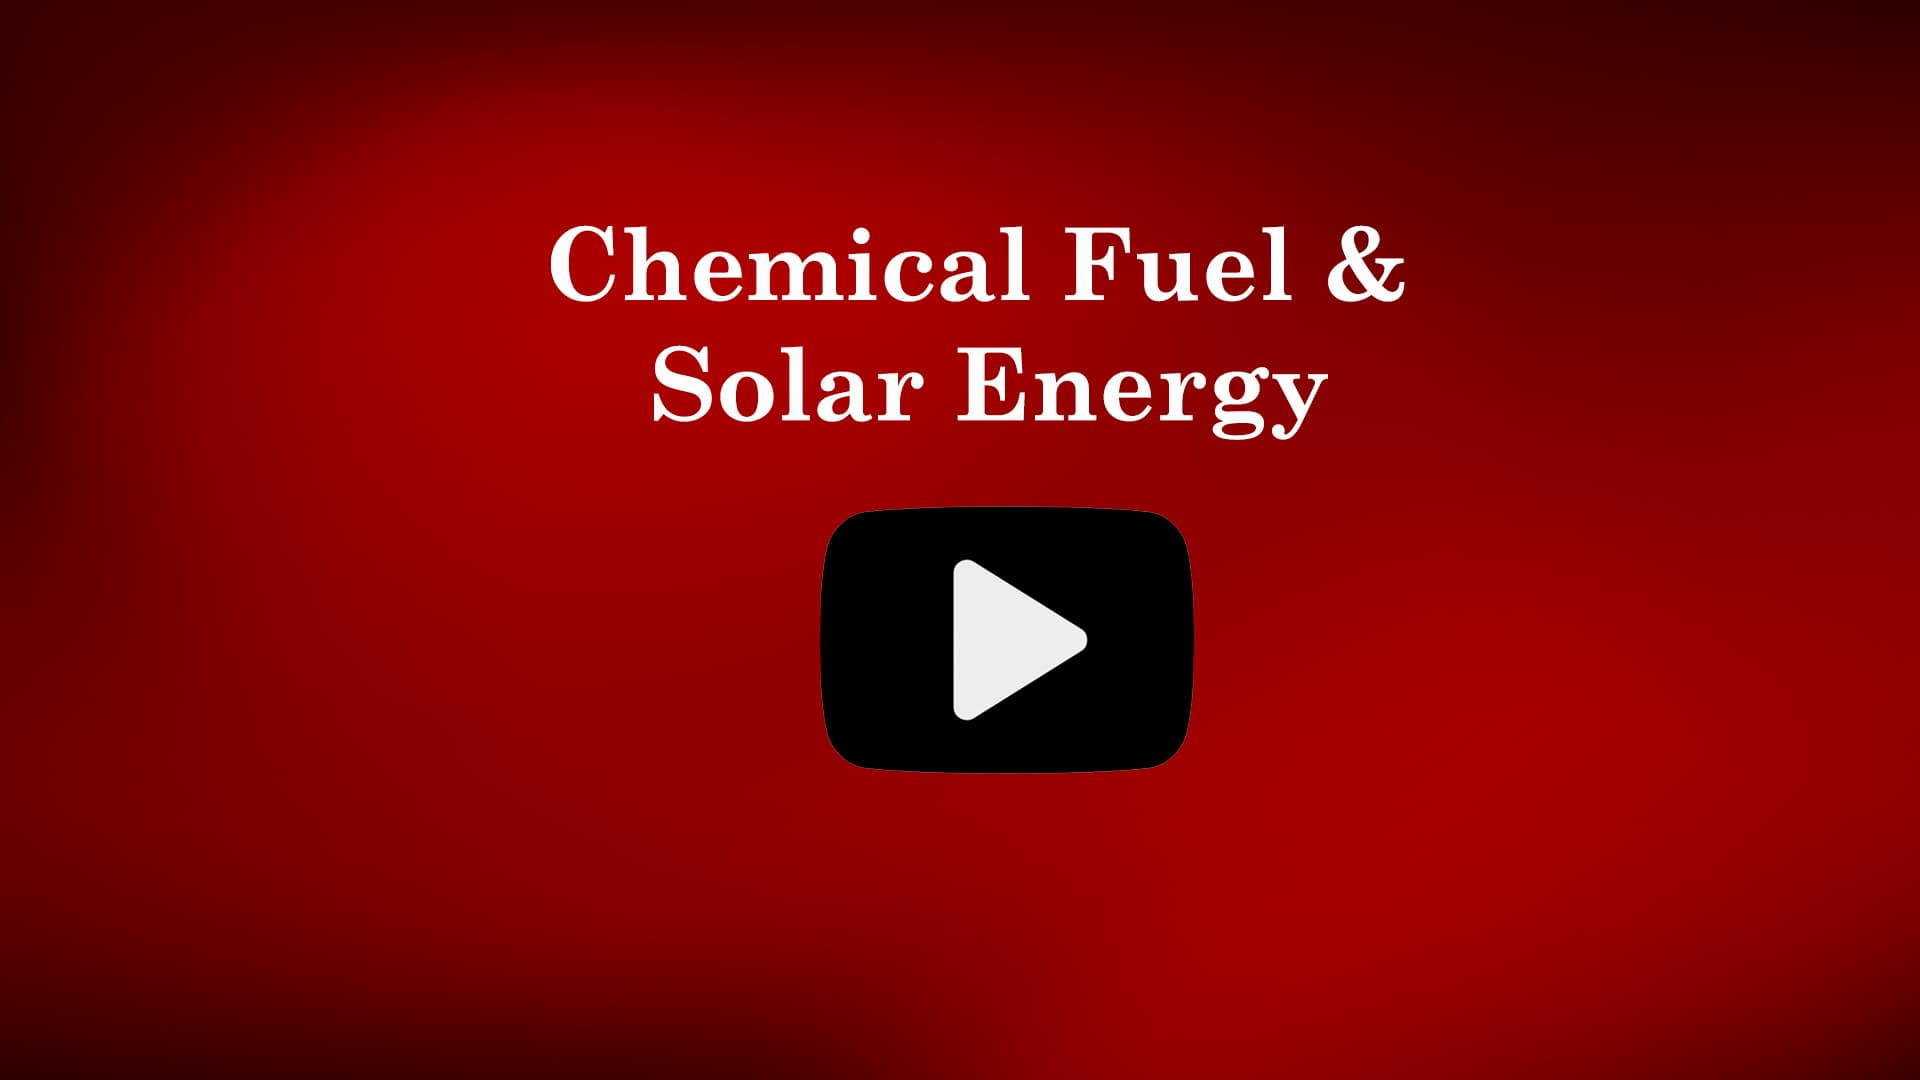 Fuels & Solar Energy - Module 3 | Vtu Engineering Chemistry - Video Lecture